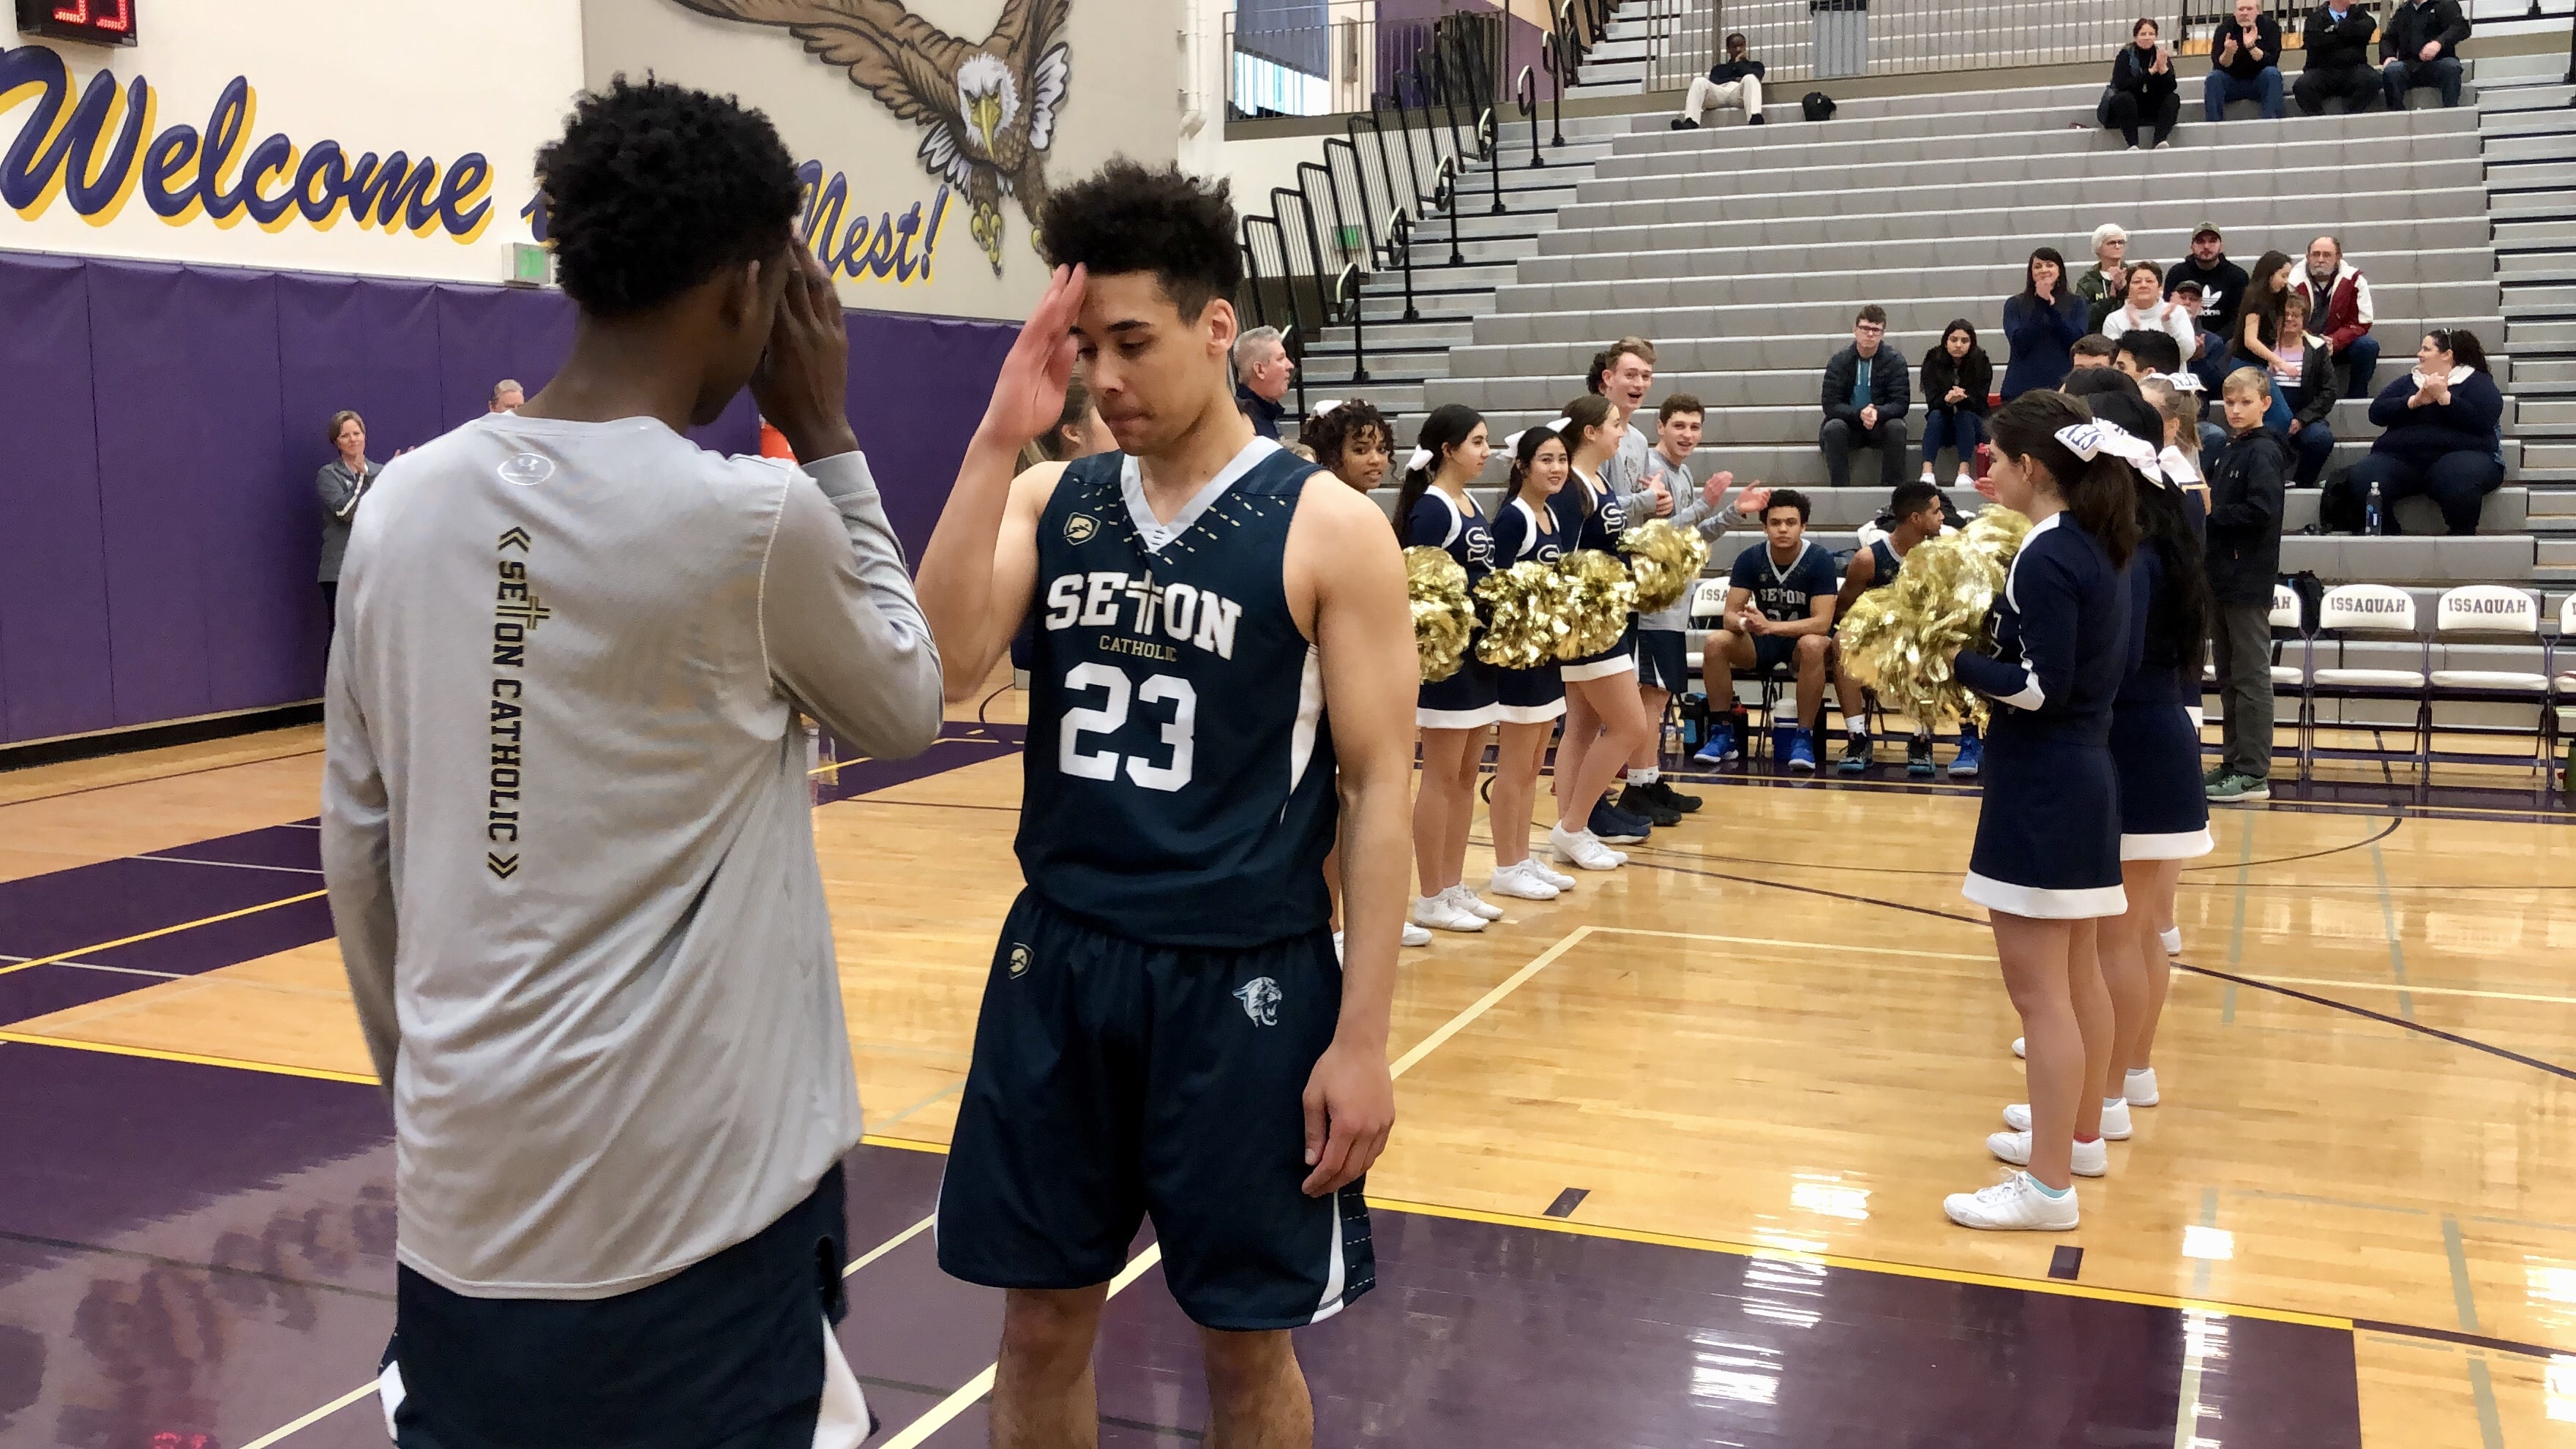 Seton Catholic's Gabe Anderson and Malik Williams coordinate a handshake during the starting lineup introductions before a 58-48 loss to Bellevue Christian on Saturday.